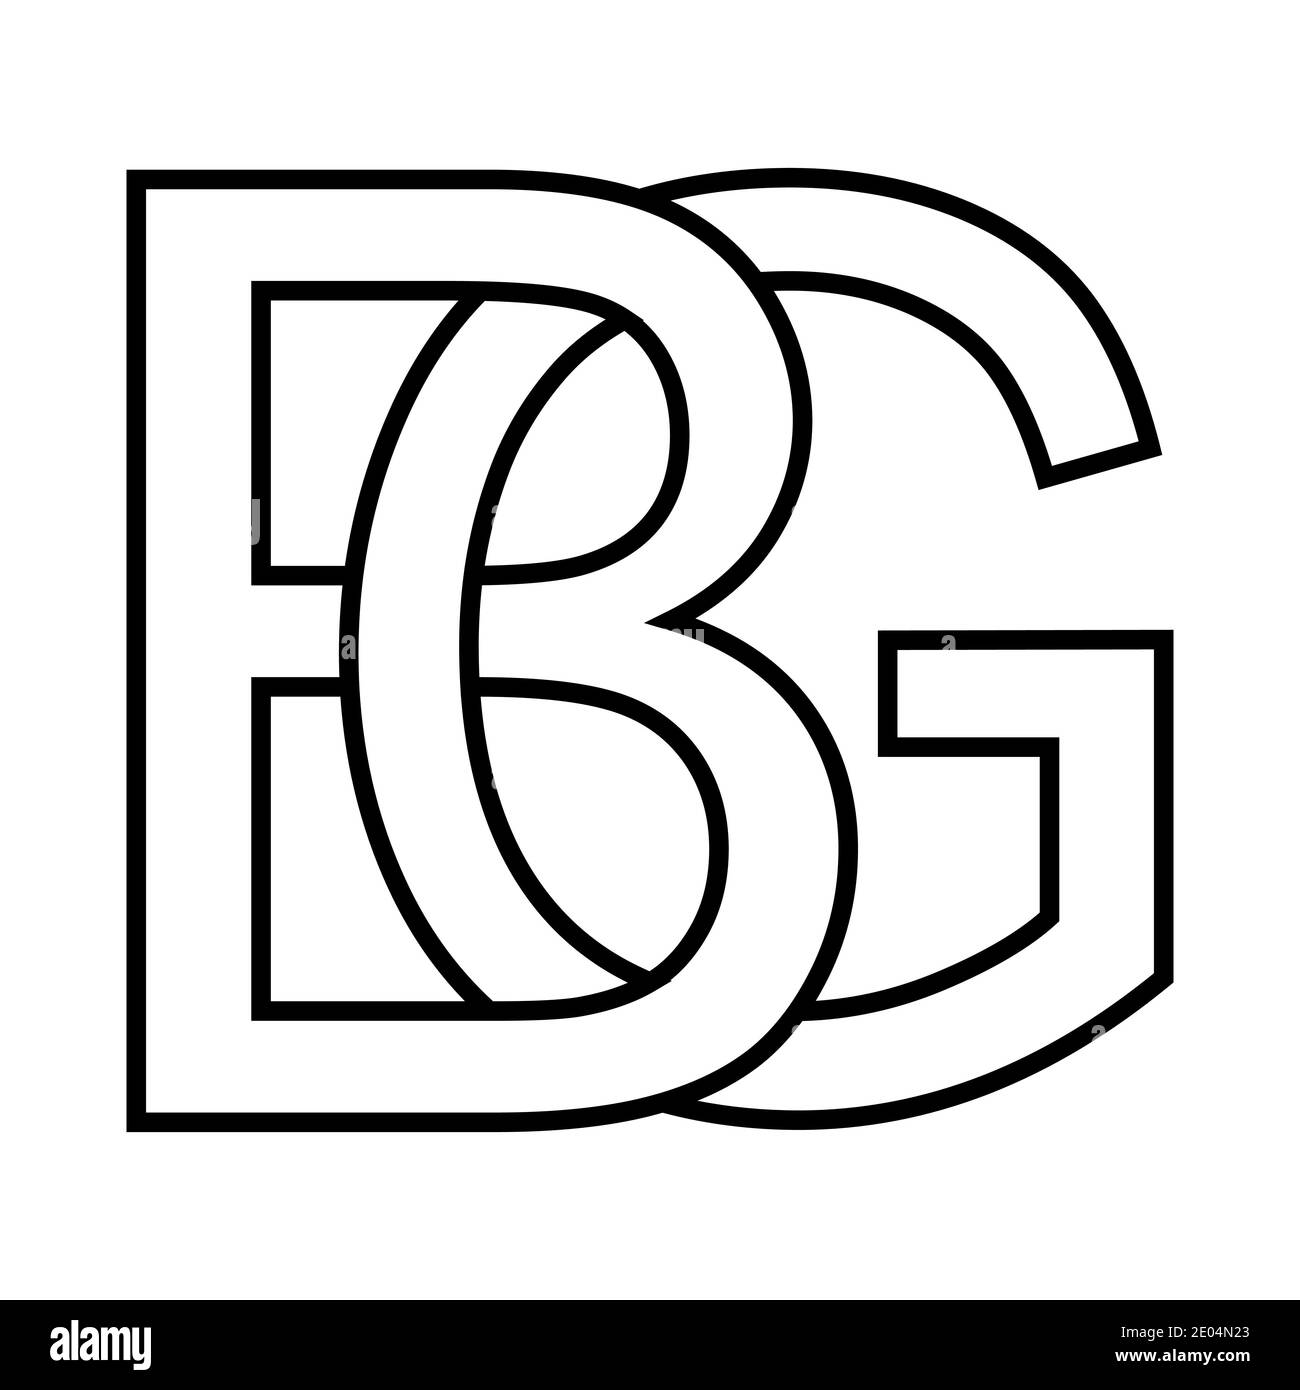 Logo sign bg gb icon sign two interlaced letters b, g vector logo bg, gb first capital letters pattern alphabet b, g Stock Vector